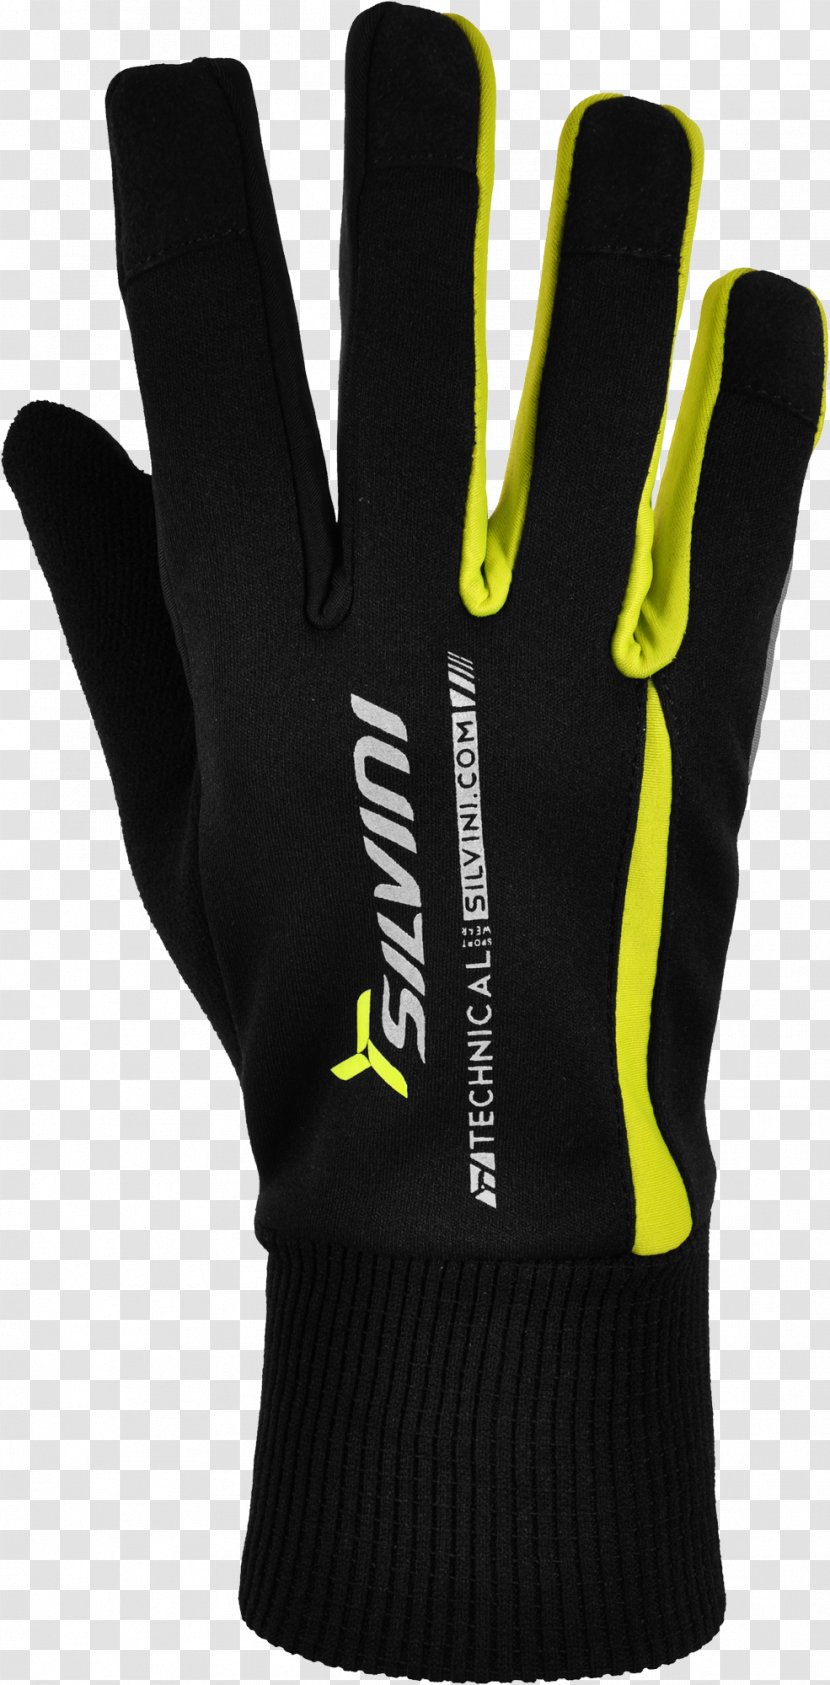 Cycling Glove Black Neon Tetra - Bicycle - Yellow Transparent PNG